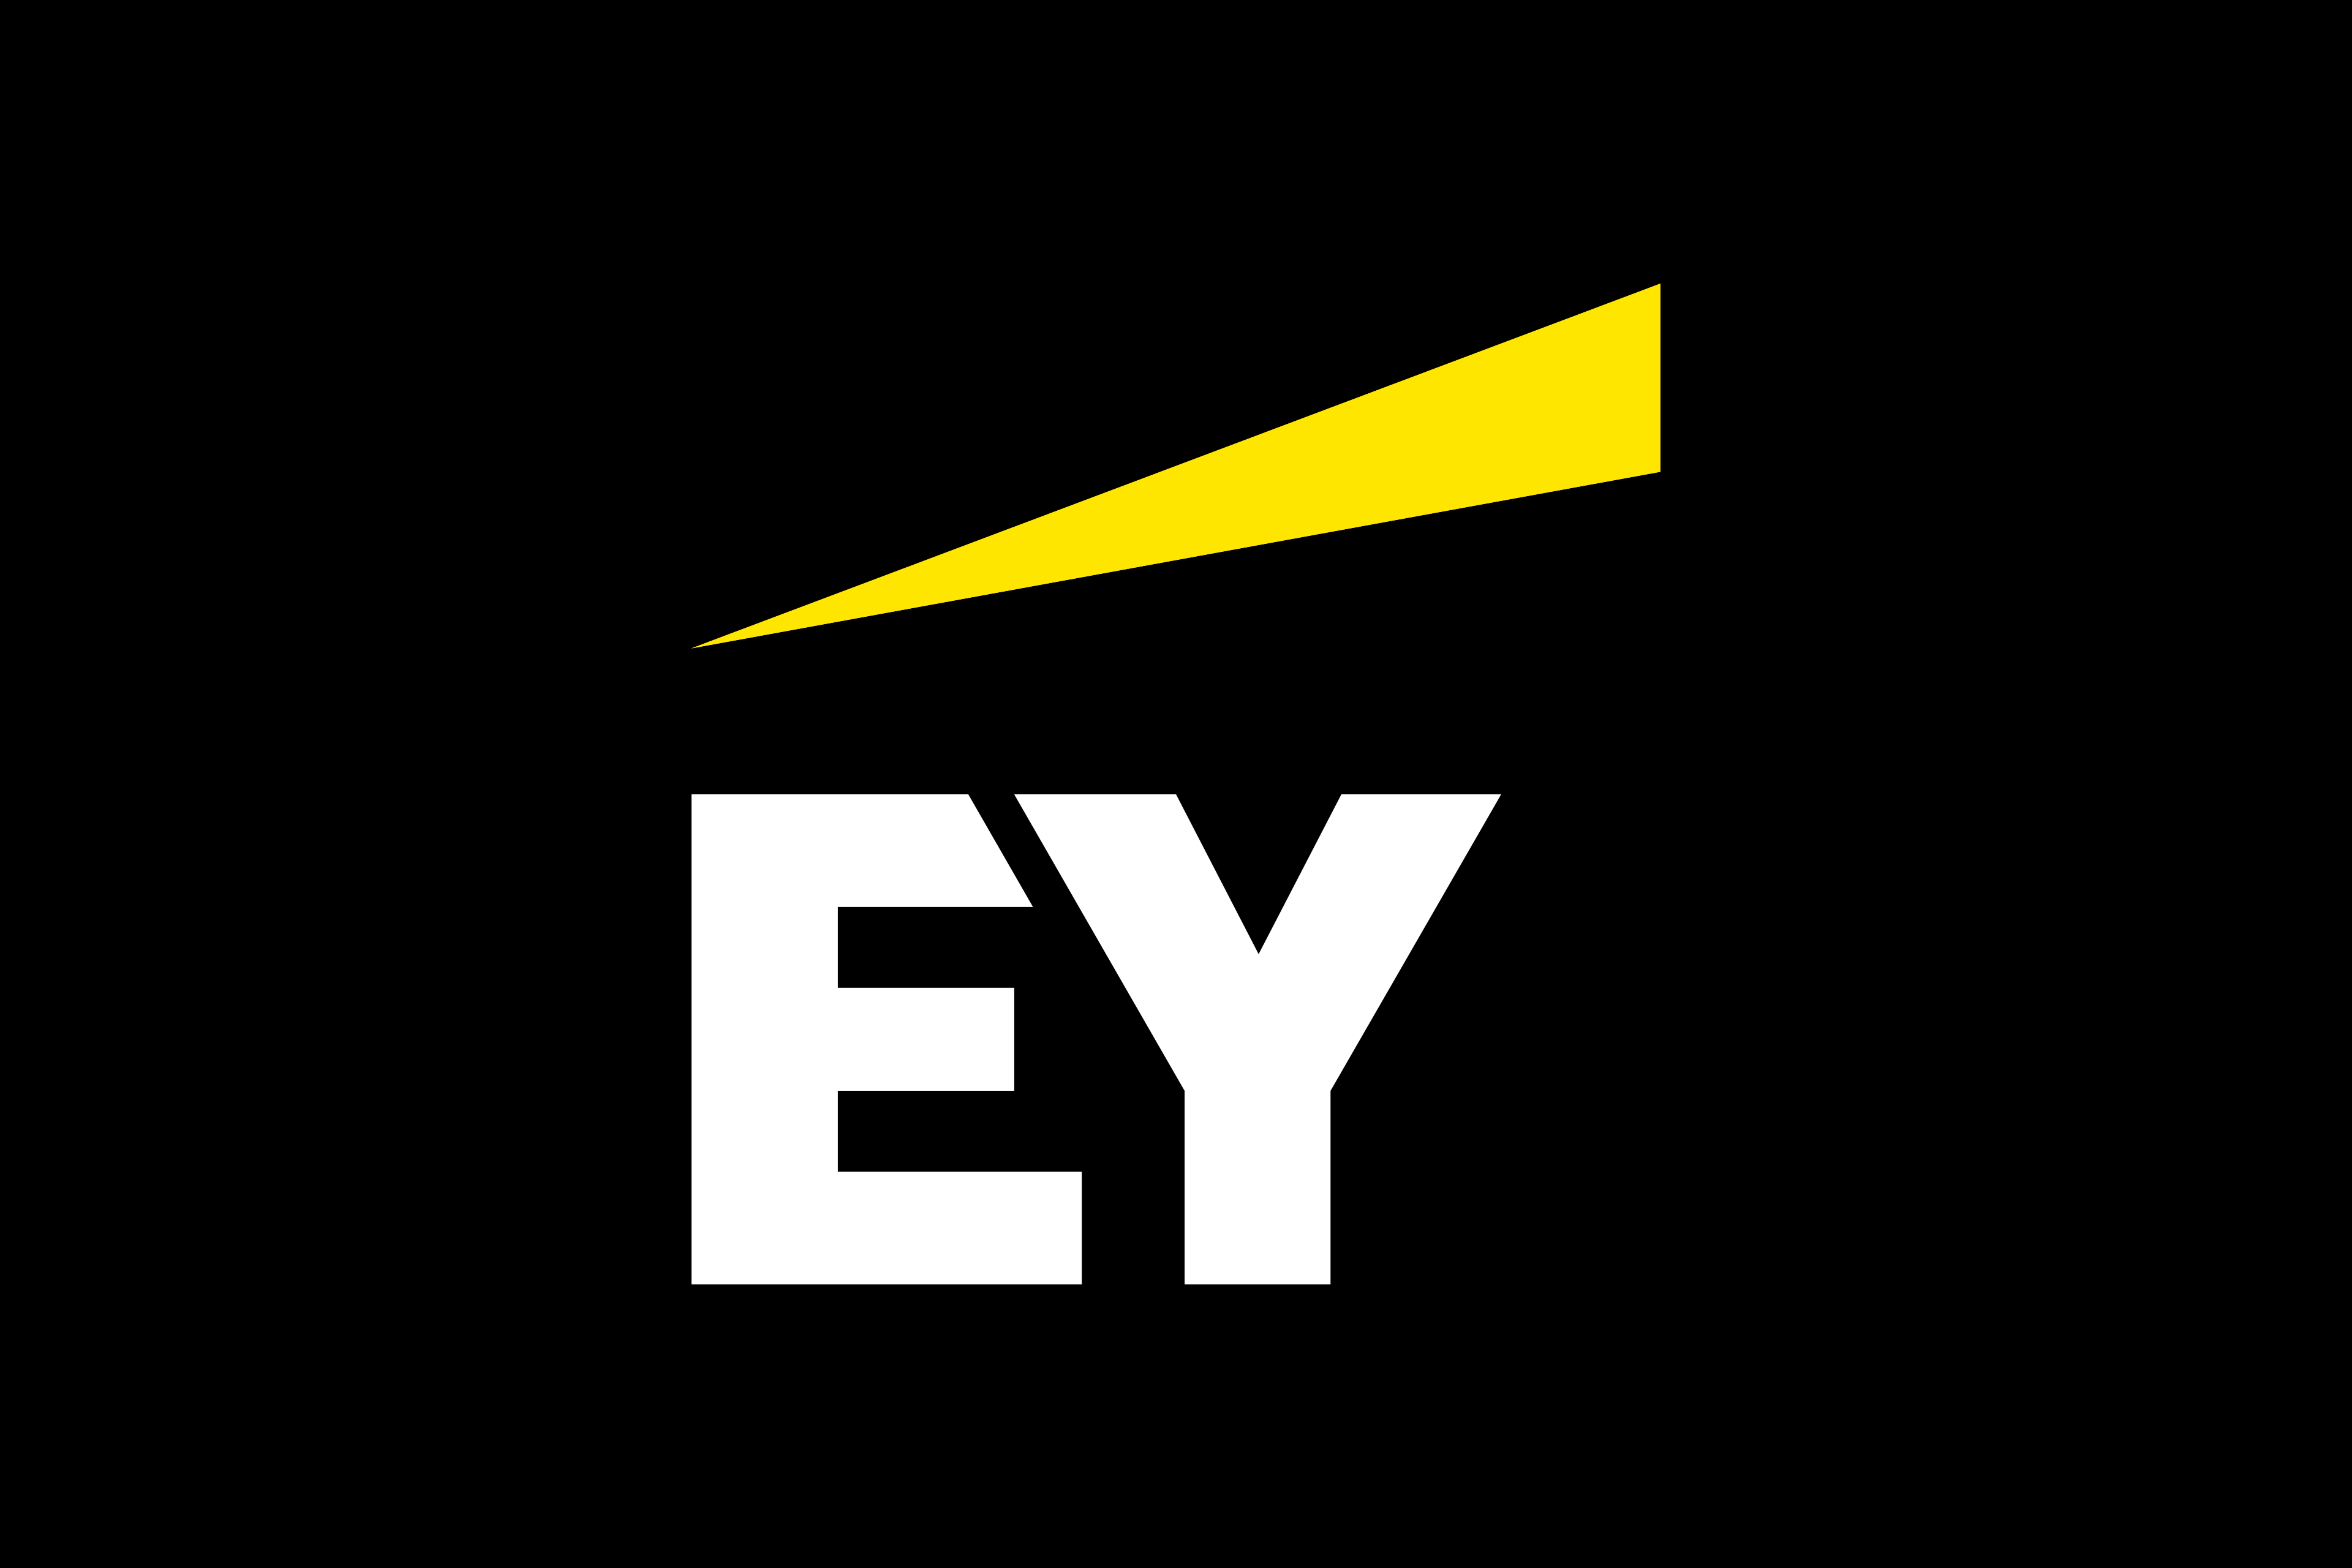 EY partners to vote on break-up after bosses approve split